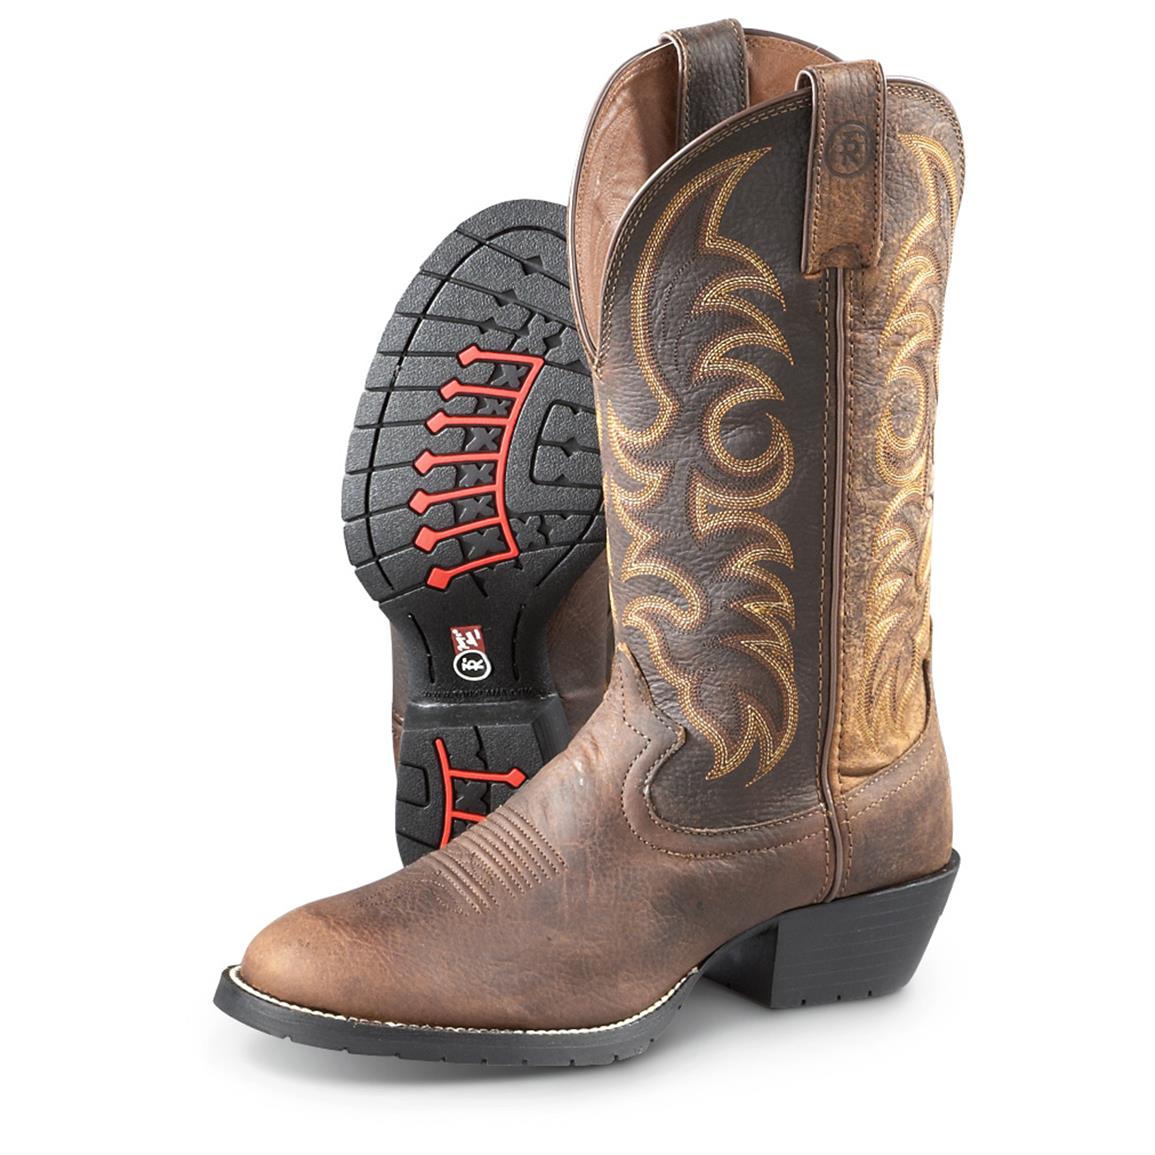 Tony Lama 3R Pitstop Western Boots - 622015, Cowboy & Western Boots at ...